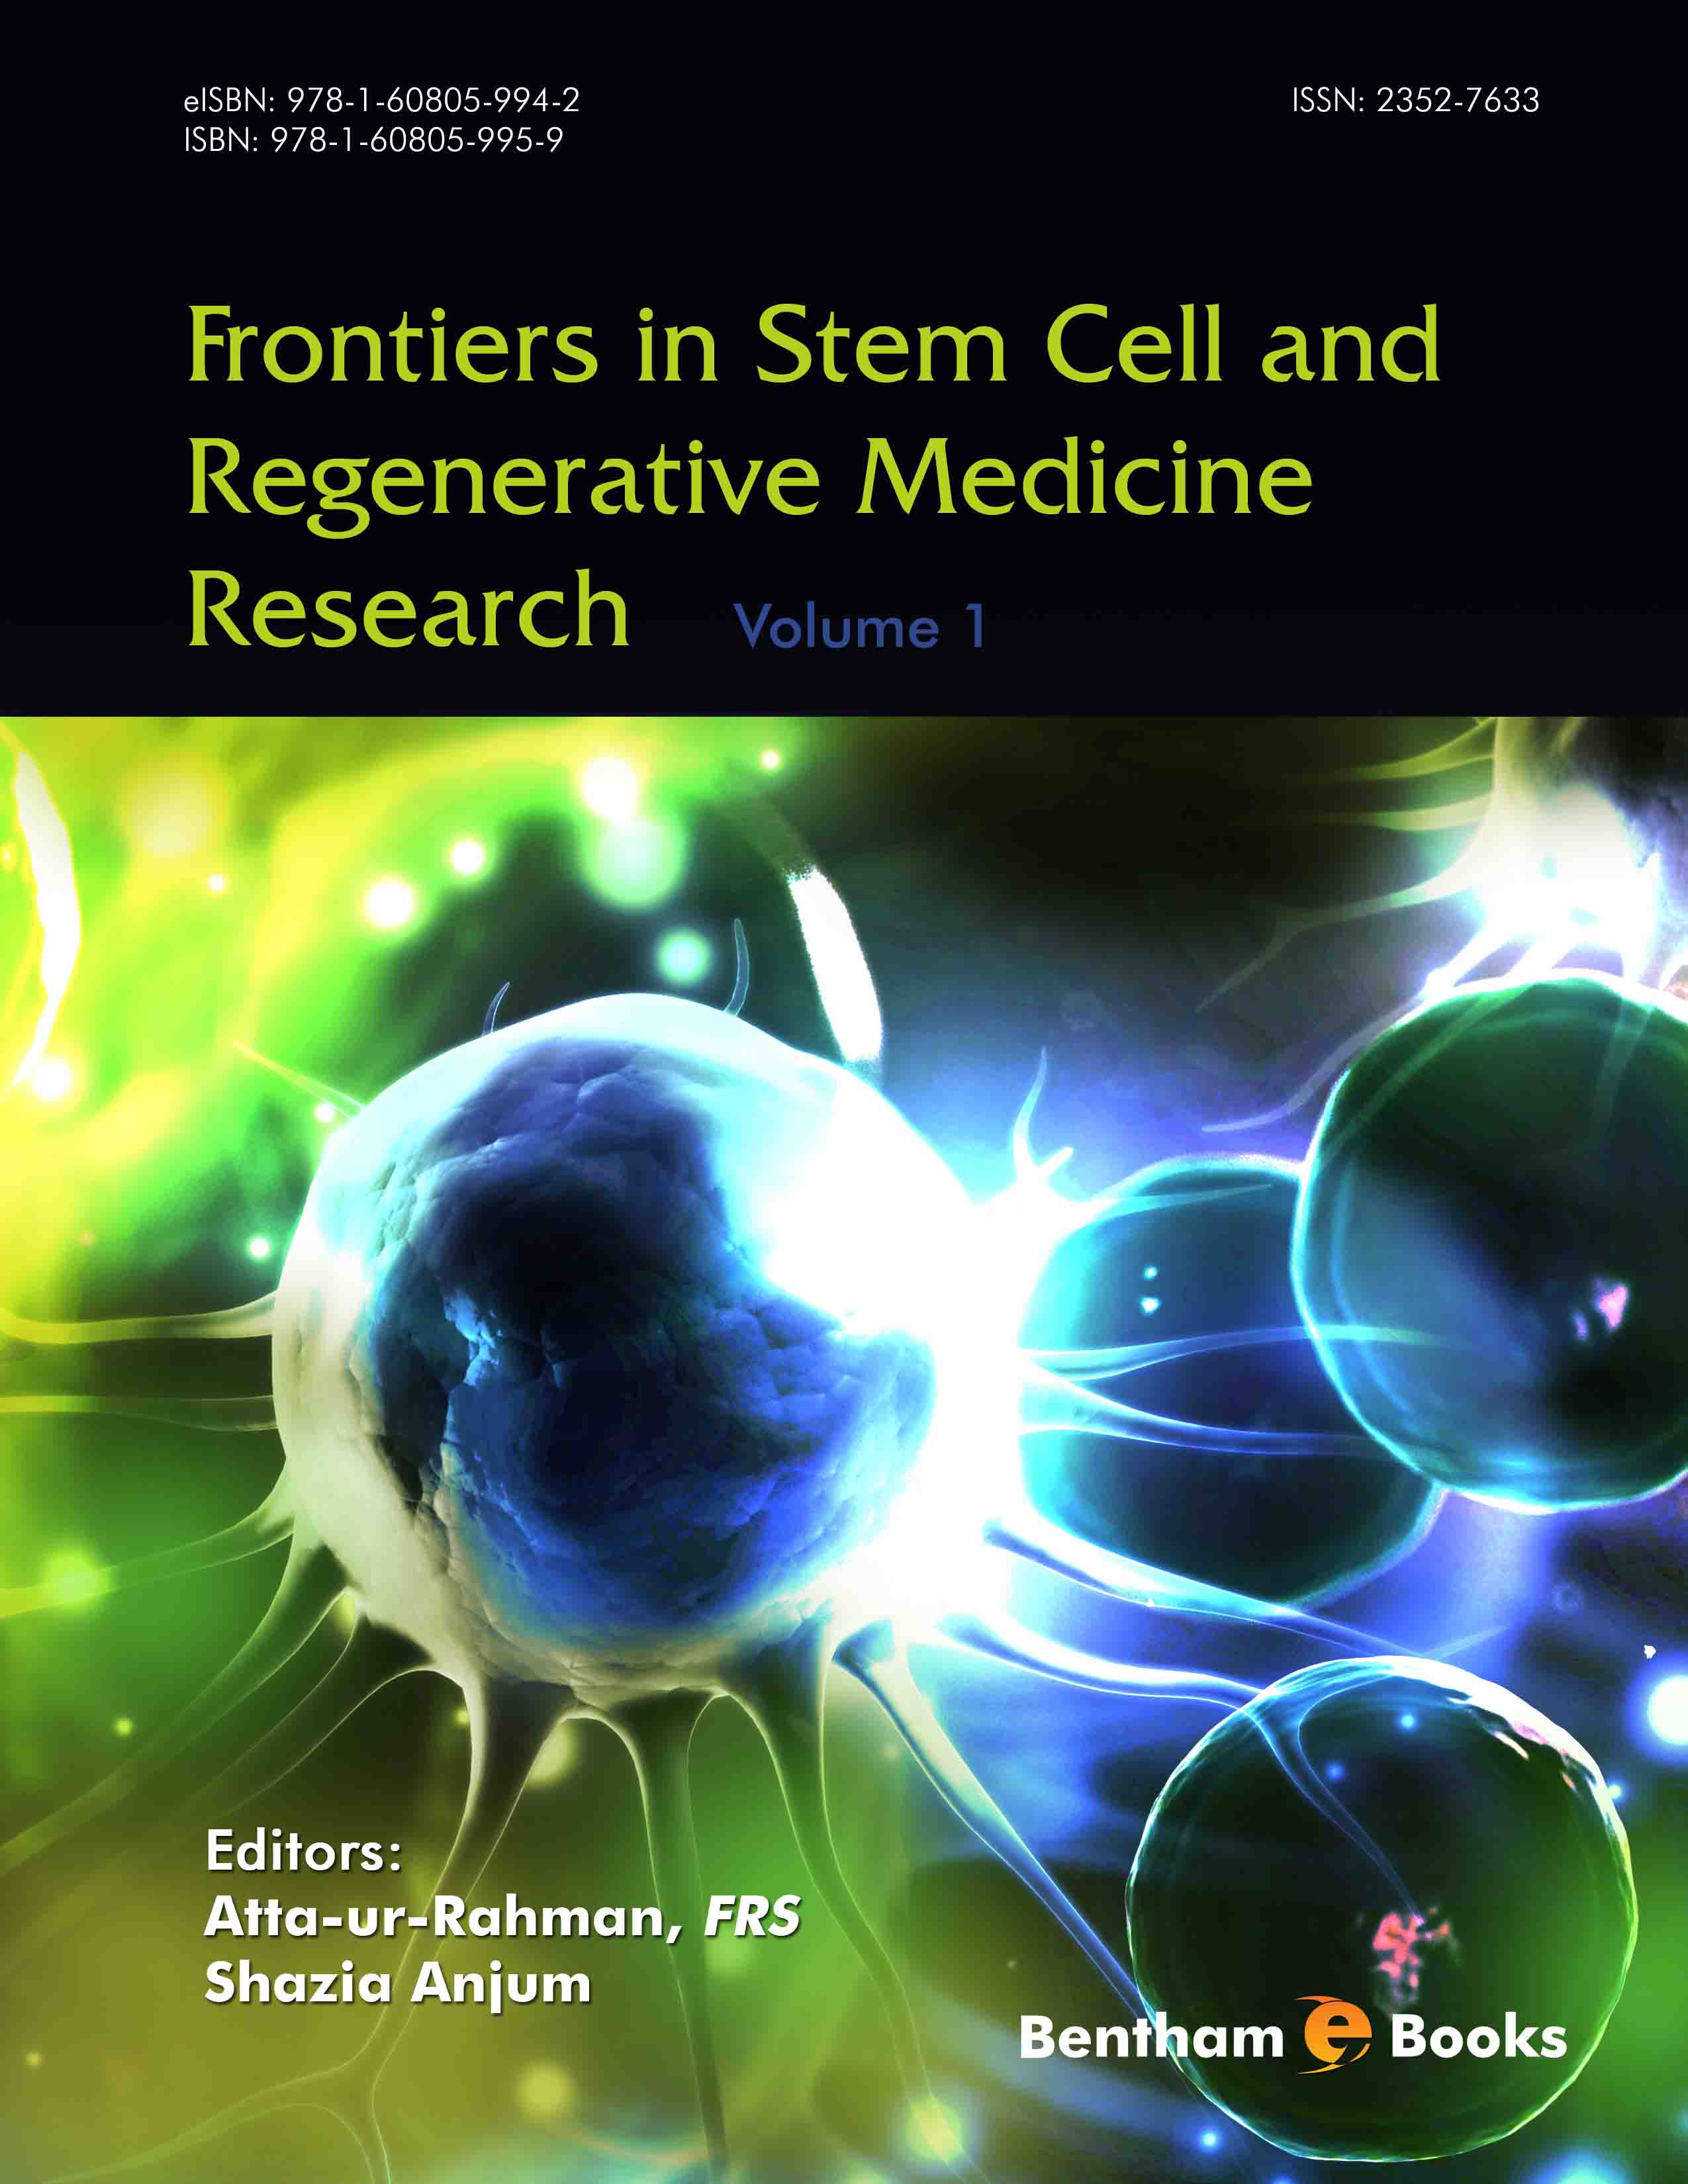 Frontiers in Stem Cell and Regenerative Medicine Research